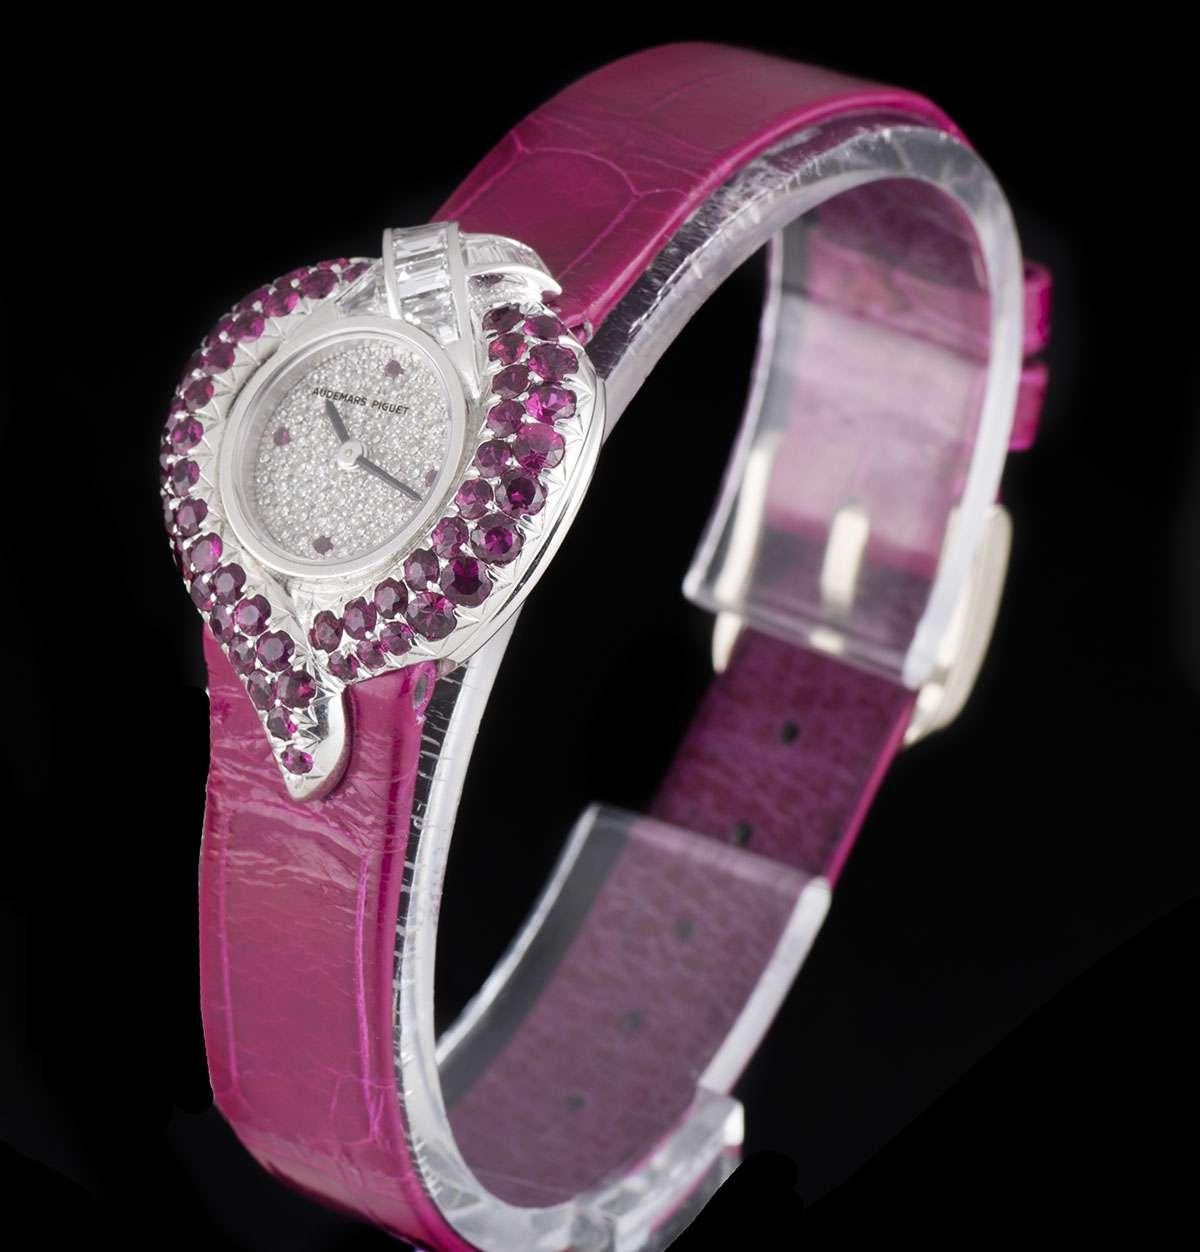 An Unworn 18k White Gold Piece Unique Diamond and Ruby Set NOS Ladies Dress Wristwatch, pave diamond dial with ruby hour markers at 3, 6, 9 and 12 0'clock, a fixed 18k white gold bezel set with approximately 51 round brilliant cut rubies (~1.50ct),